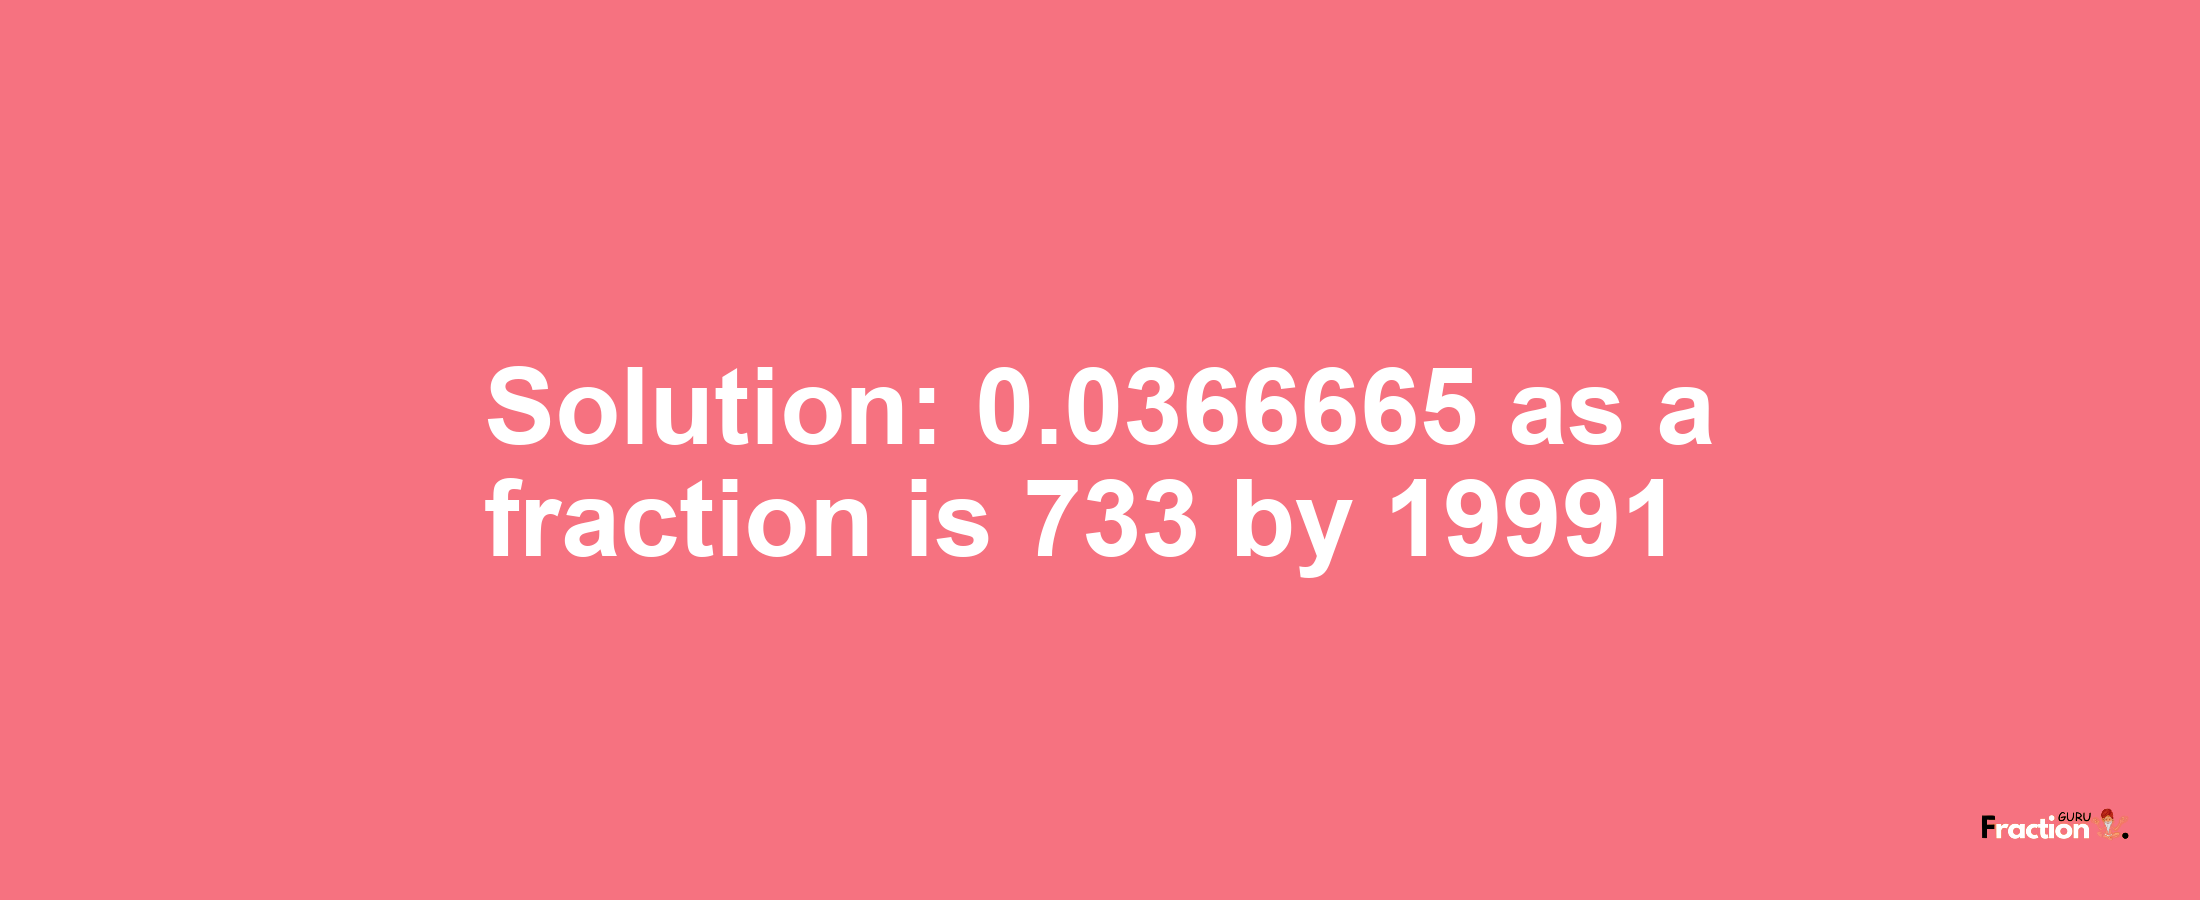 Solution:0.0366665 as a fraction is 733/19991